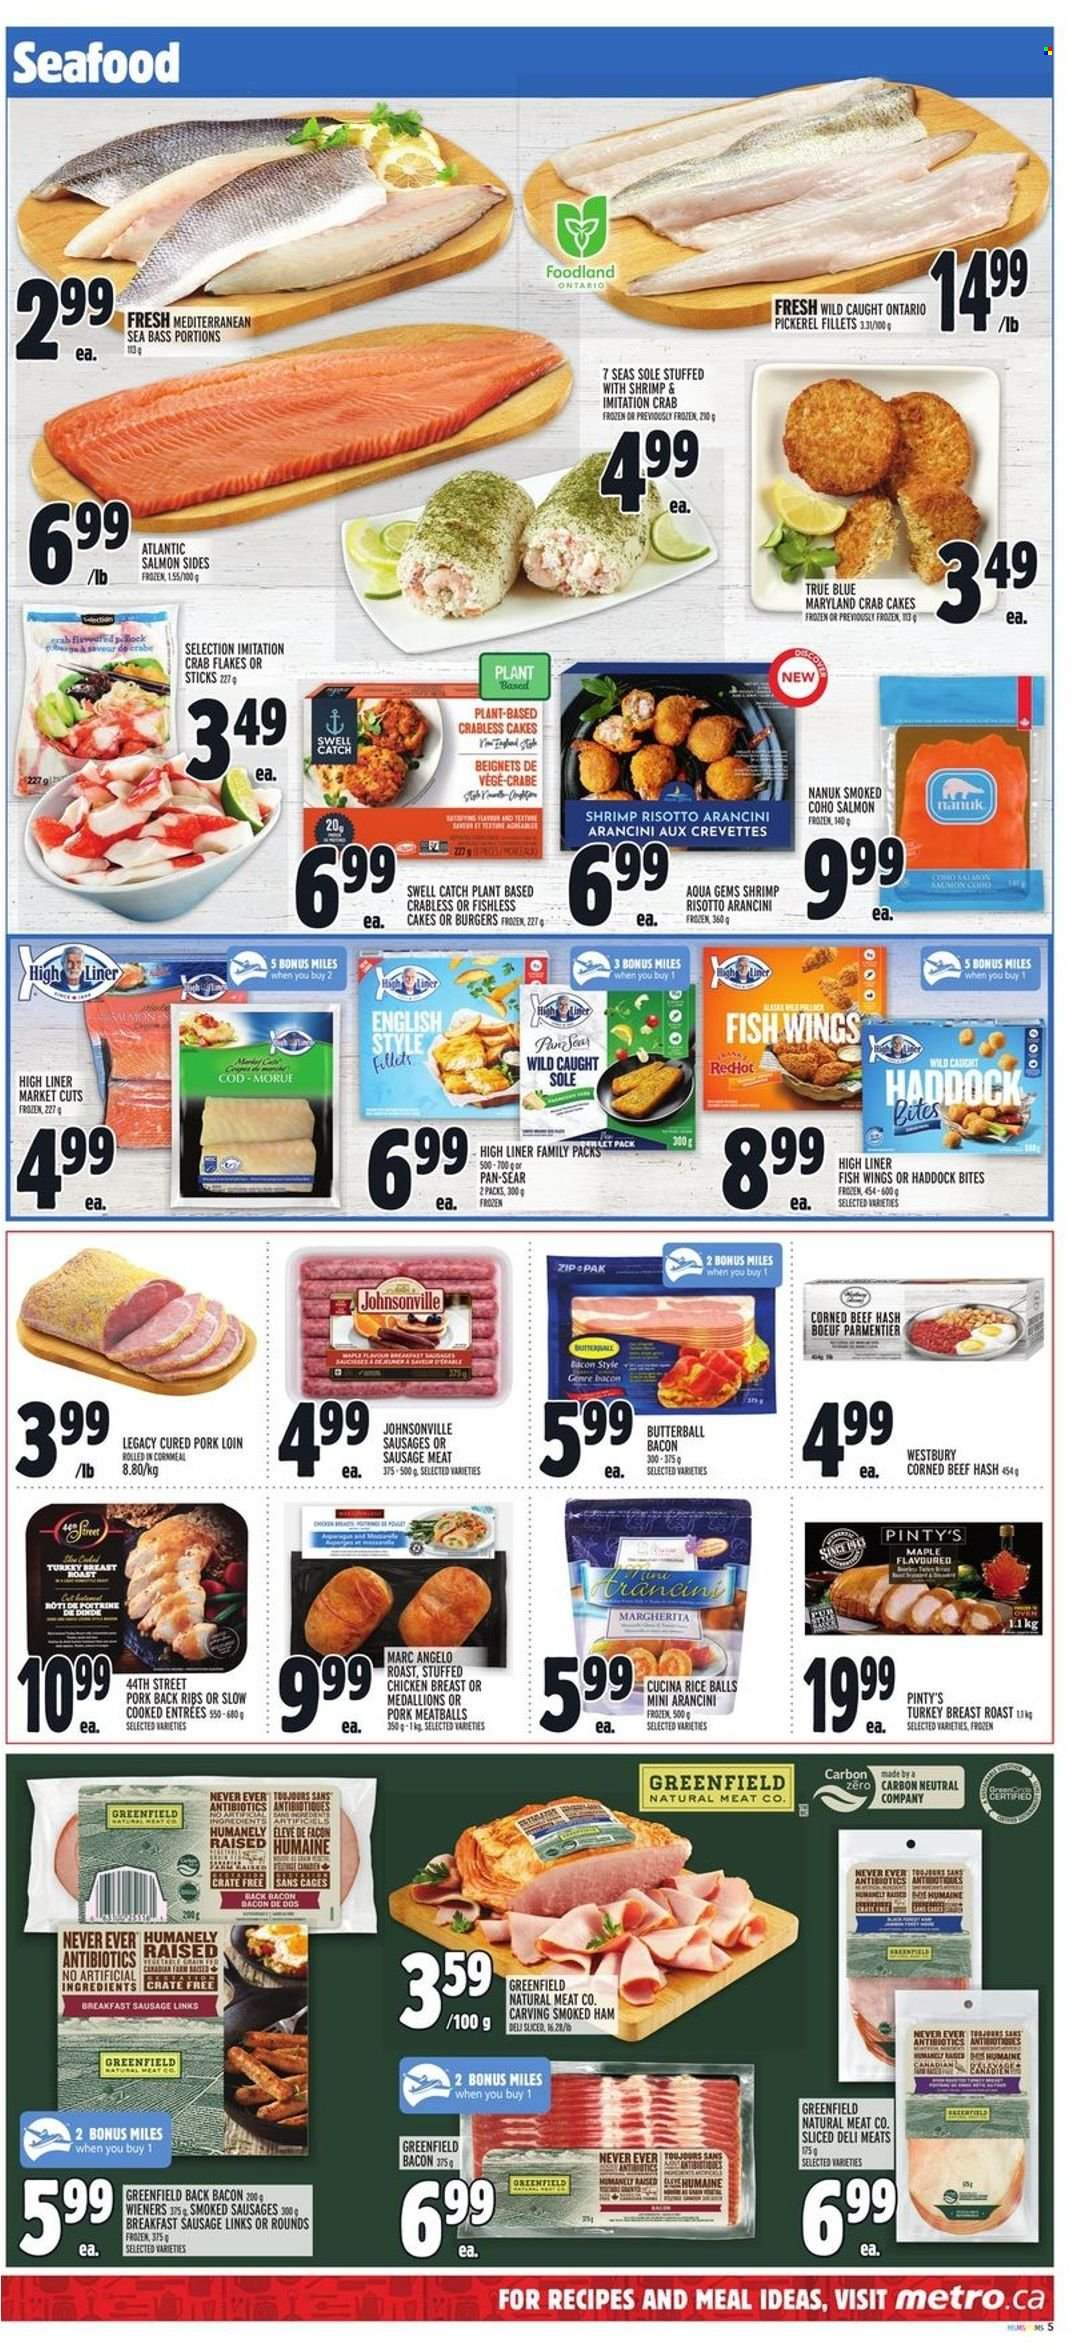 thumbnail - Metro Flyer - November 25, 2021 - December 01, 2021 - Sales products - cod, salmon, sea bass, haddock, seafood, fish, shrimps, walleye, beef hash, crab cake, risotto, meatballs, stuffed chicken, bacon, Butterball, ham, smoked ham, Johnsonville, sausage, corned beef, rice balls, turkey breast, chicken, turkey, beef meat, sausage meat, pork loin, pork meat, pork ribs, pork back ribs, pan, crate. Page 7.